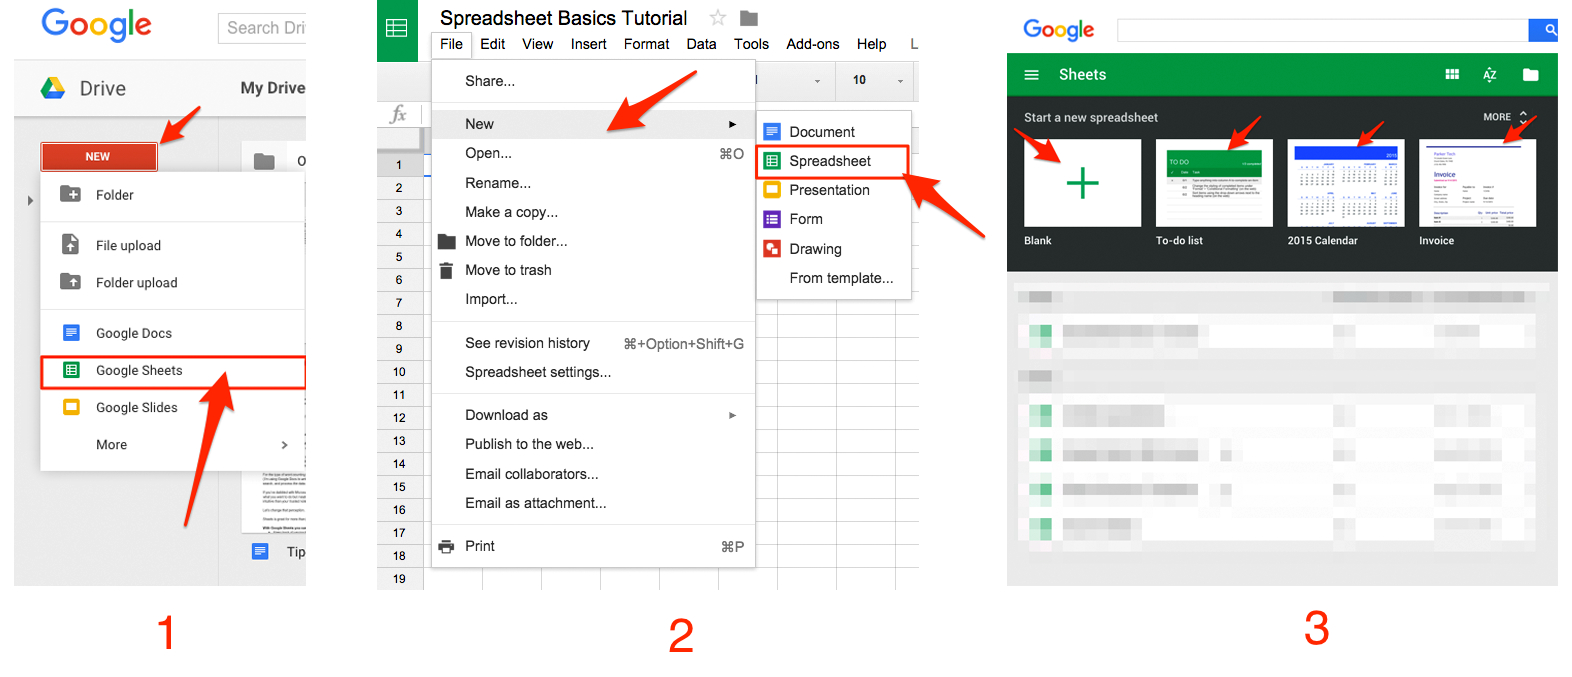 Web Based Spreadsheet Free Regarding Google Sheets 101: The Beginner's Guide To Online Spreadsheets  The